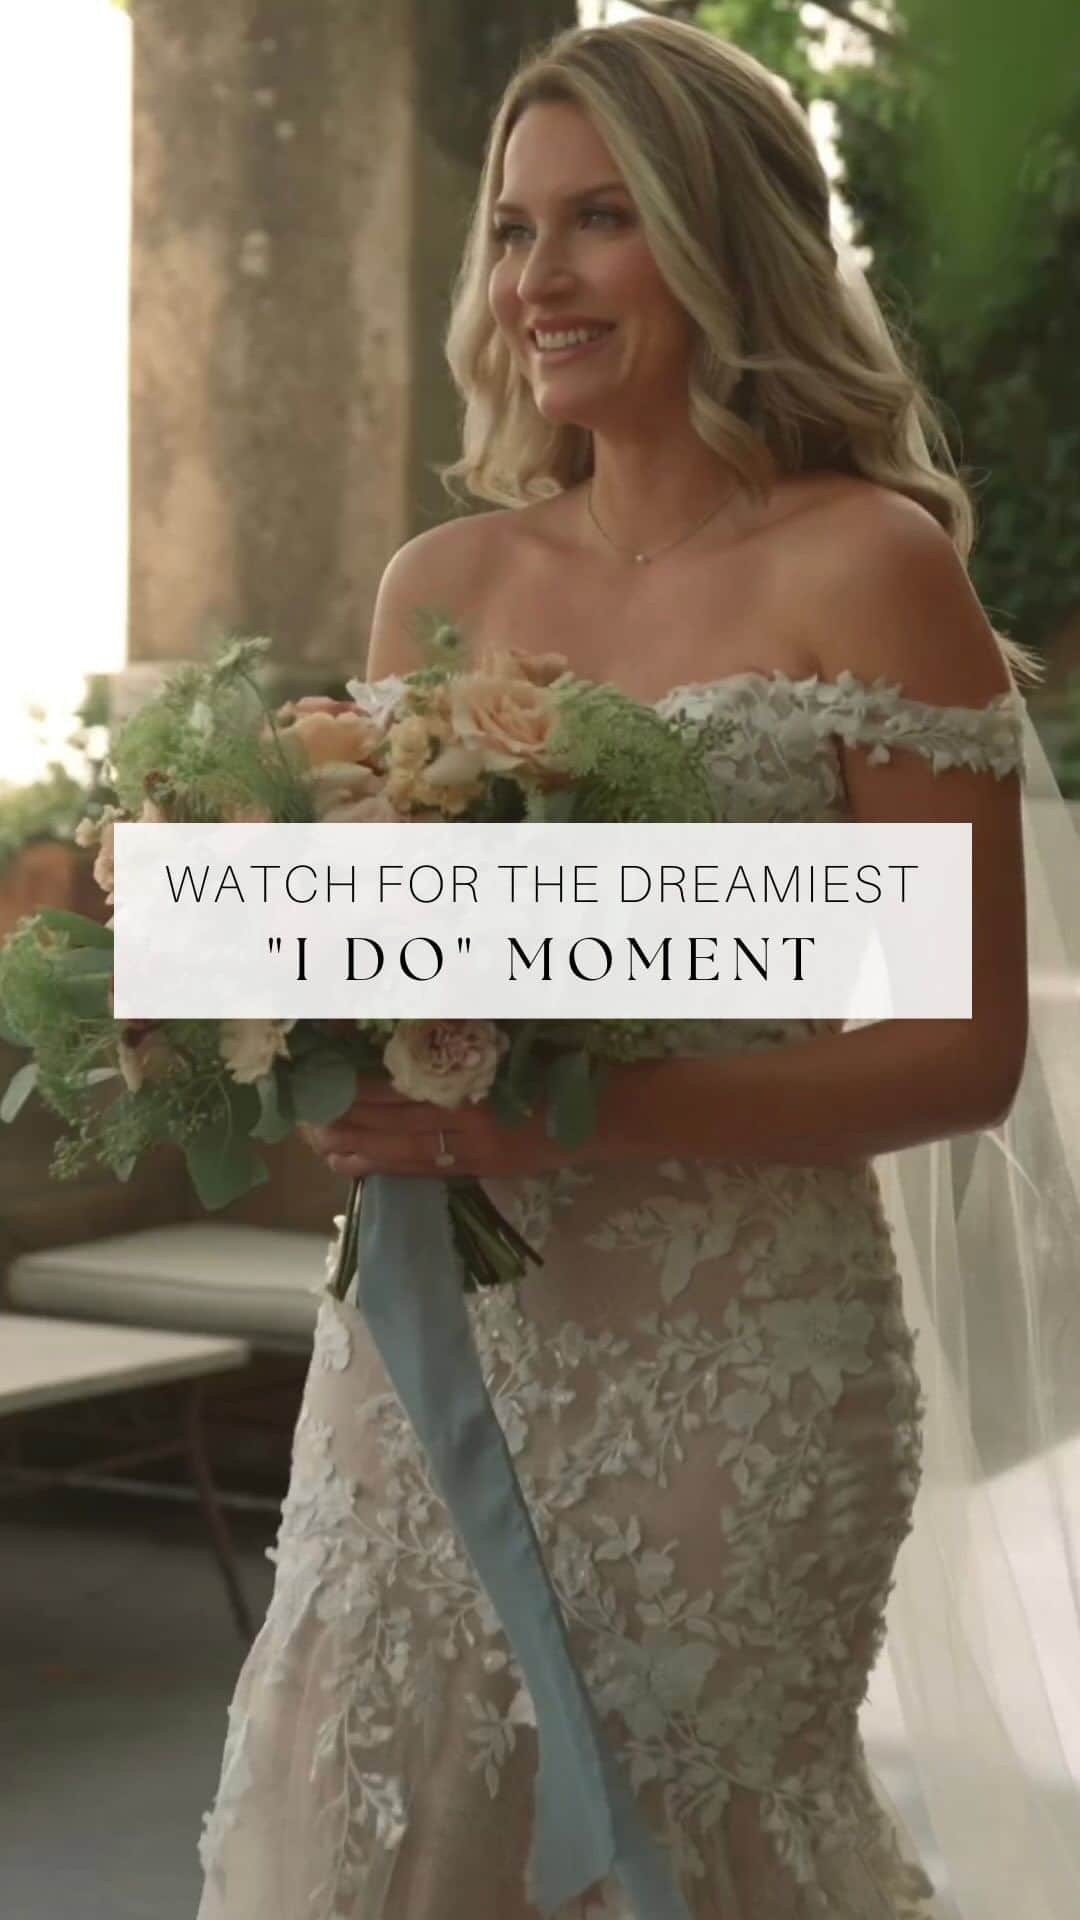 WEDDING APPARELのインスタグラム：「BRB, can’t stop crying after seeing this oh-so-dreamy “I Do” moment 💕 We can all agree that @toaspenwithlove’s #Positanowedding was one for the books! Tag someone who needs to see this in the comments 👇   Bride: @toaspenwithlove   #firstlook #firstlookwedding #weddingdress #brideandgroom #luxurywedding #bridetobe #weddingideas #engaged #weddinginspiration #weddingdetails #weddingwednesday #firstlookreaction #walkdowntheaisle #weddinginspo #italywedding #positanowedding #dreamwedding #2023bride #modernwedding #eventdesign #weddingaisle #weddinggown #bridalfashion #weddingceremony」